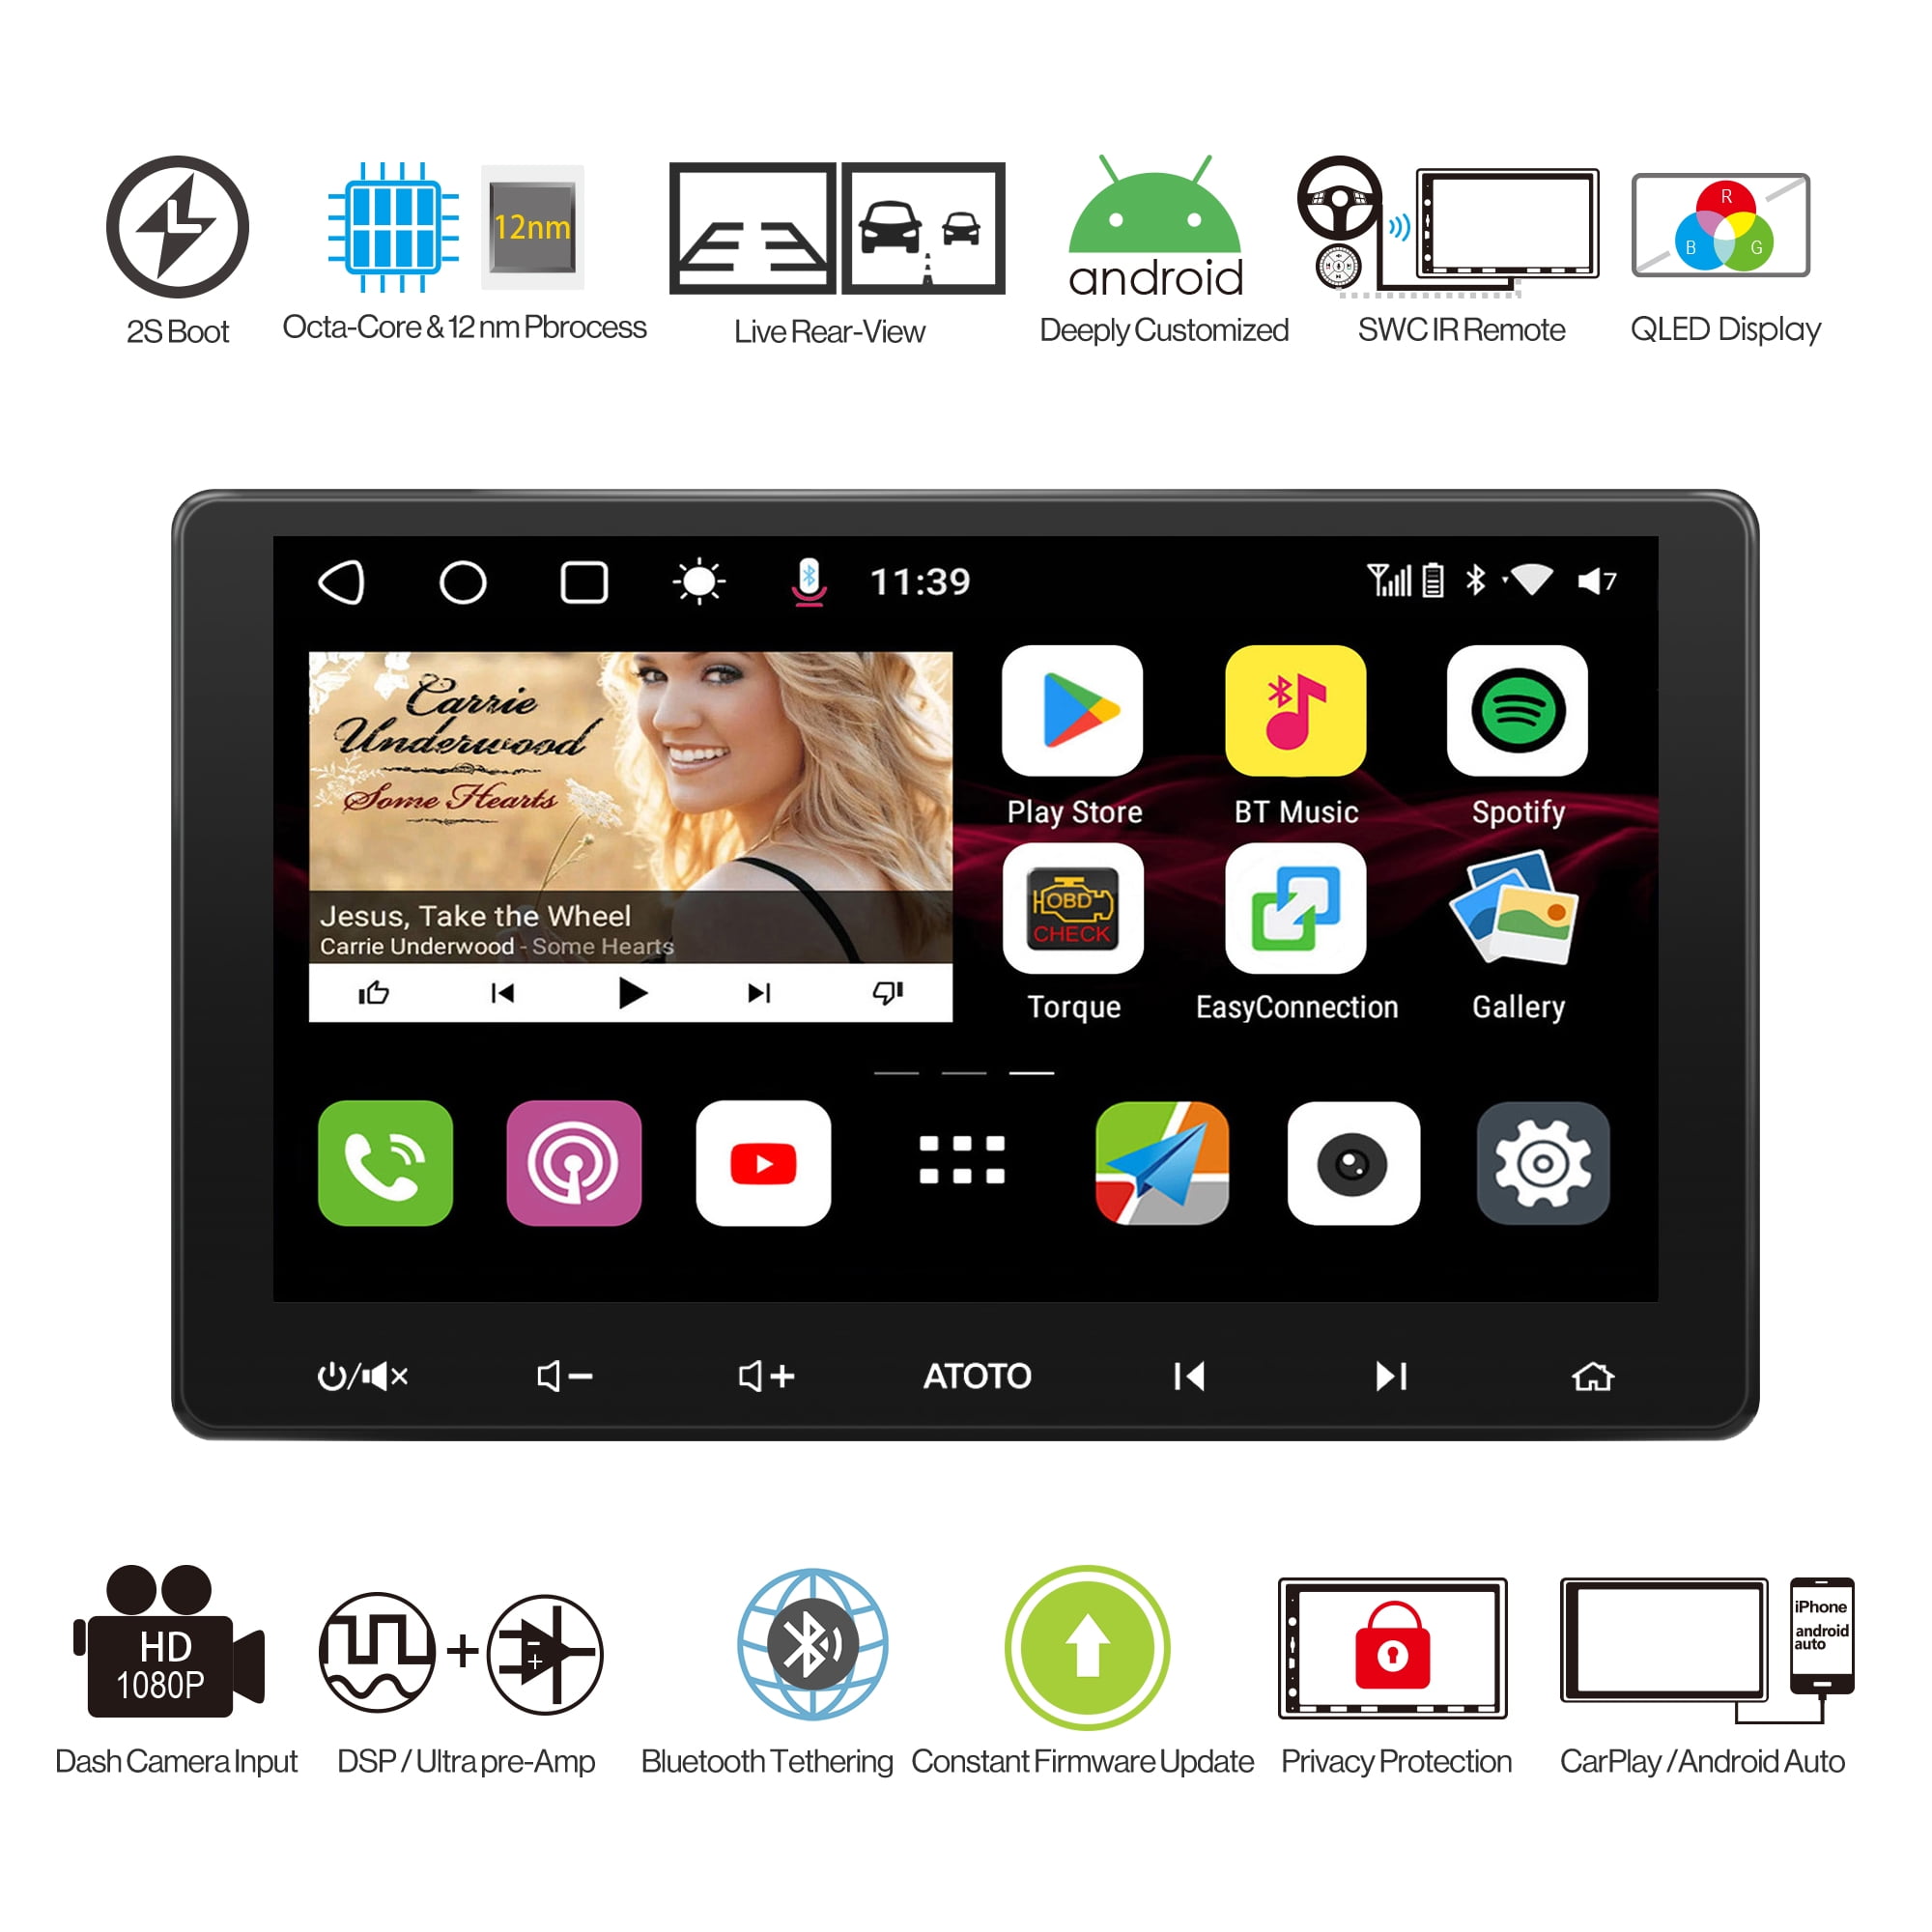  ATOTO S8 Premium 10 inch QLED Double-DIN Android Car Stereo,  in-Dash Video Receiver, Wireless CarPlay & Wireless Android Auto, 3G+32G,  2BT w/aptX HD, USB Tethering, HD VSV Parking with LRV,S8G2114PM 